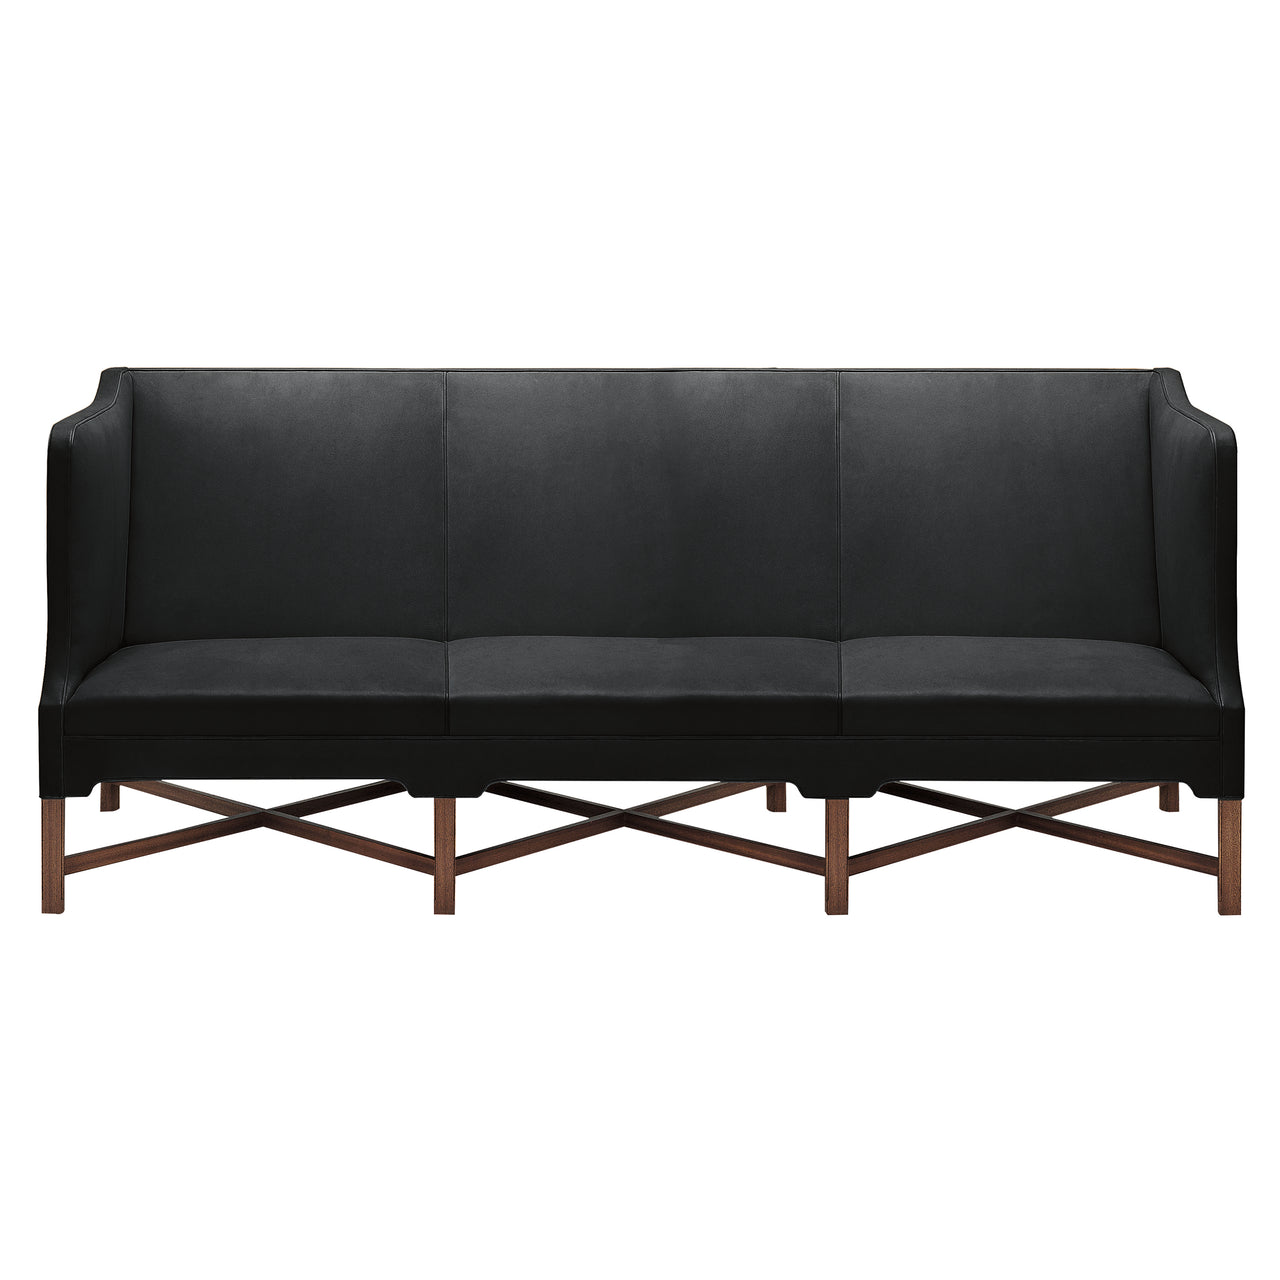 Sofa with High Sides: 3 Seater + Oiled Walnut